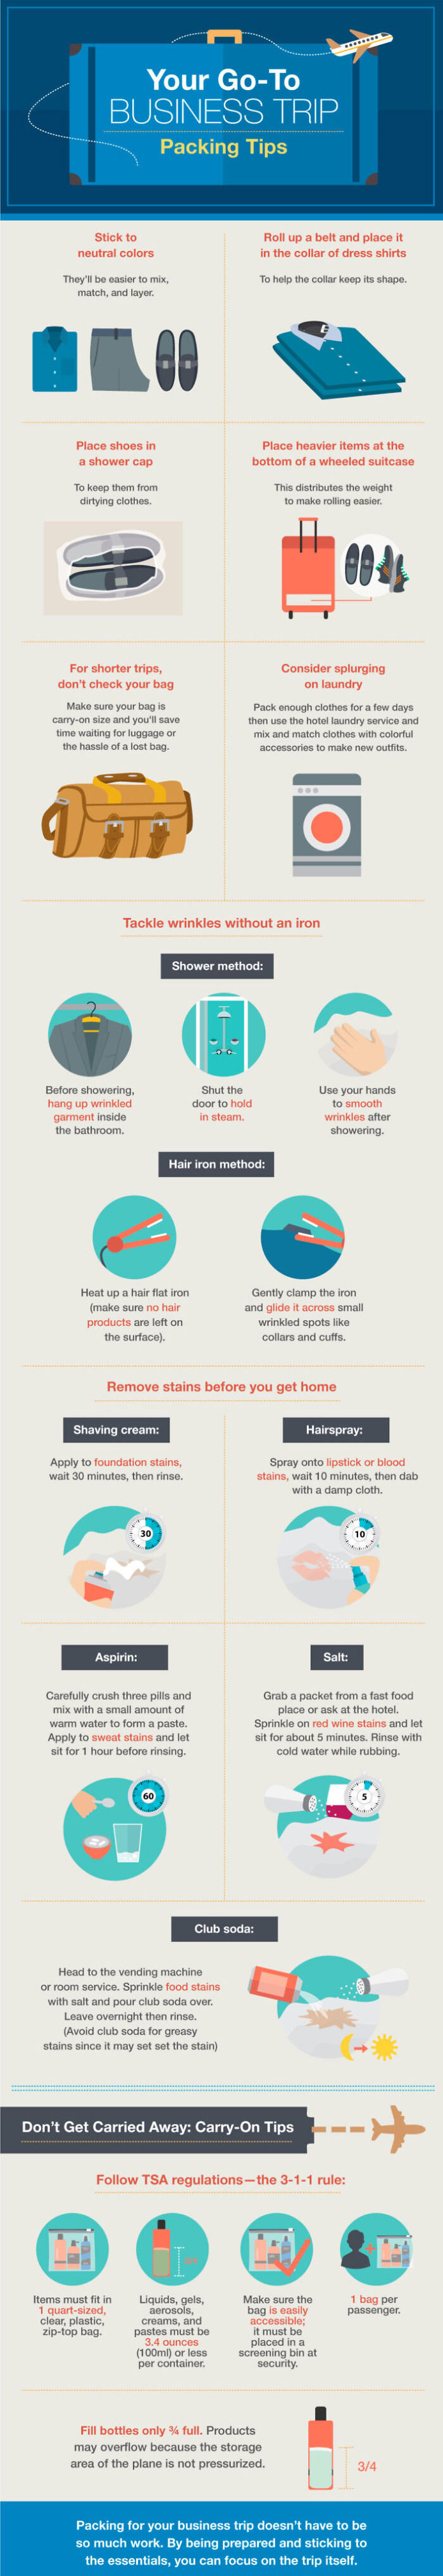 Go-To Business Trip Packing Tips